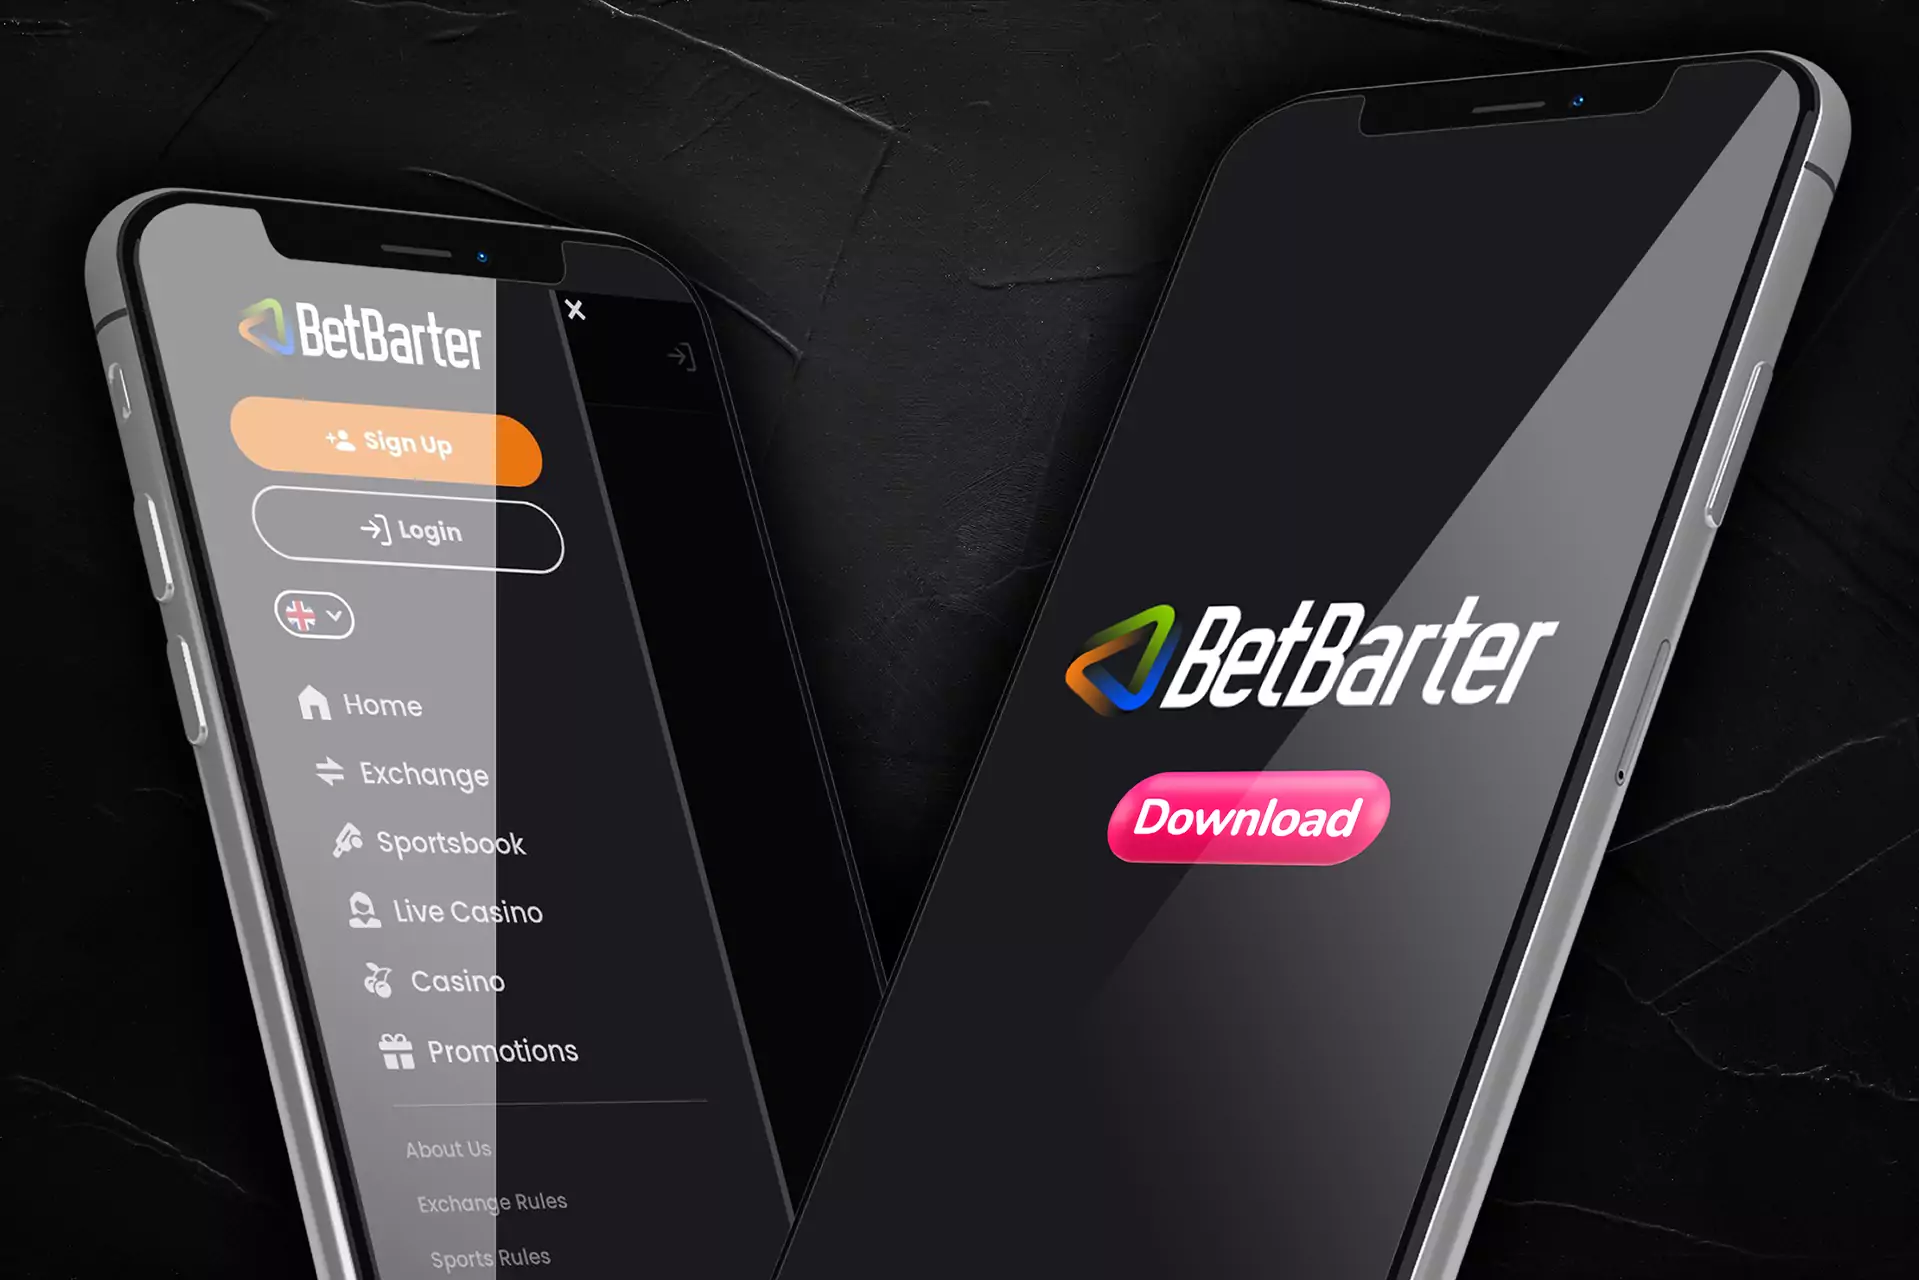 Download the Betbarter apk for Android, following these steps.